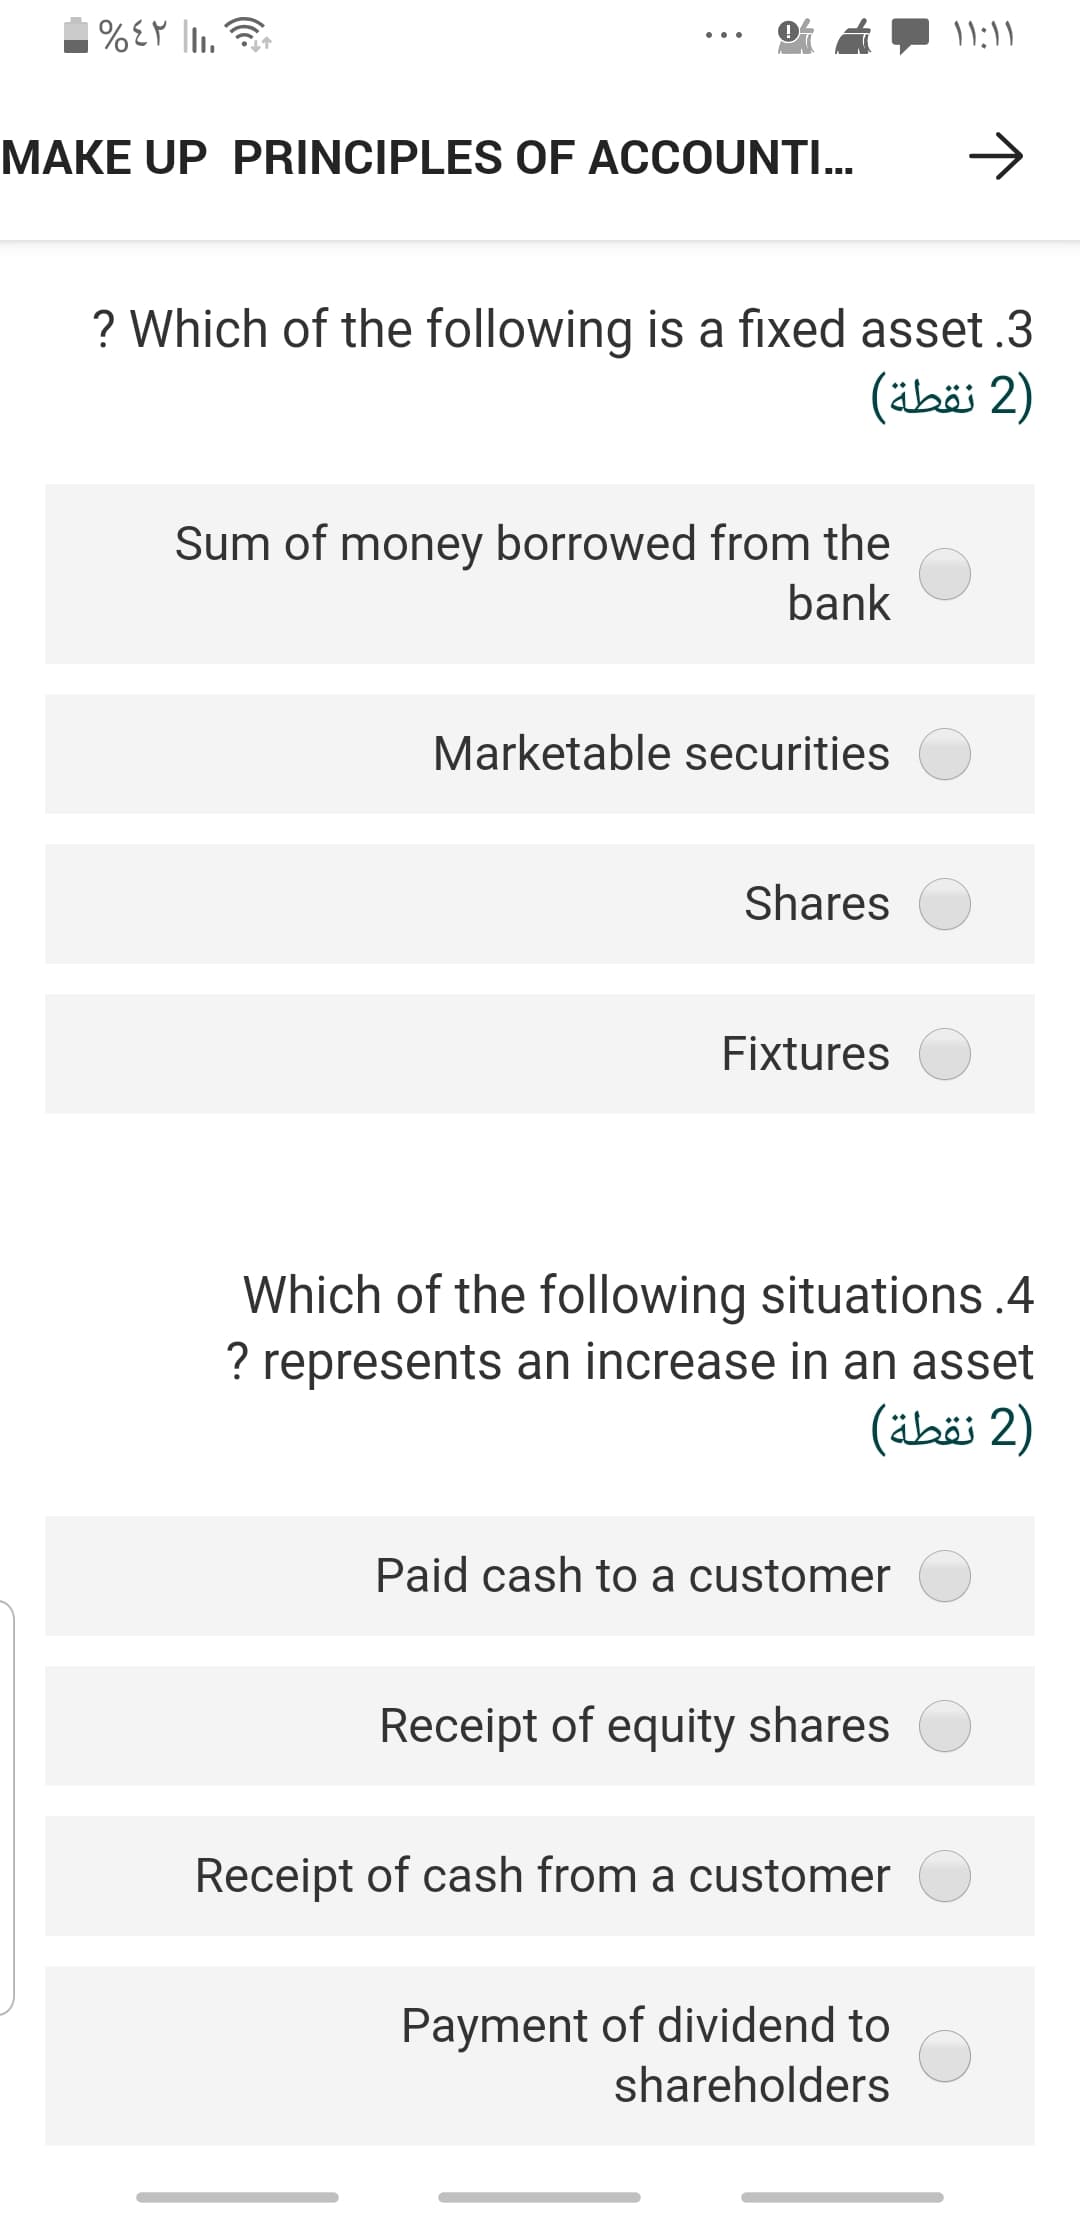 MAKE UP PRINCIPLES OF ACCOUNTI..
->
? Which of the following is a fixed asset .3
)2 نقطة(
Sum of money borrowed from the
bank
Marketable securities
Shares
Fixtures
Which of the following situations .4
? represents an increase in an asset
)2 نقطة(
Paid cash to a customer
Receipt of equity shares
Receipt of cash from a customer
Payment of dividend to
shareholders
